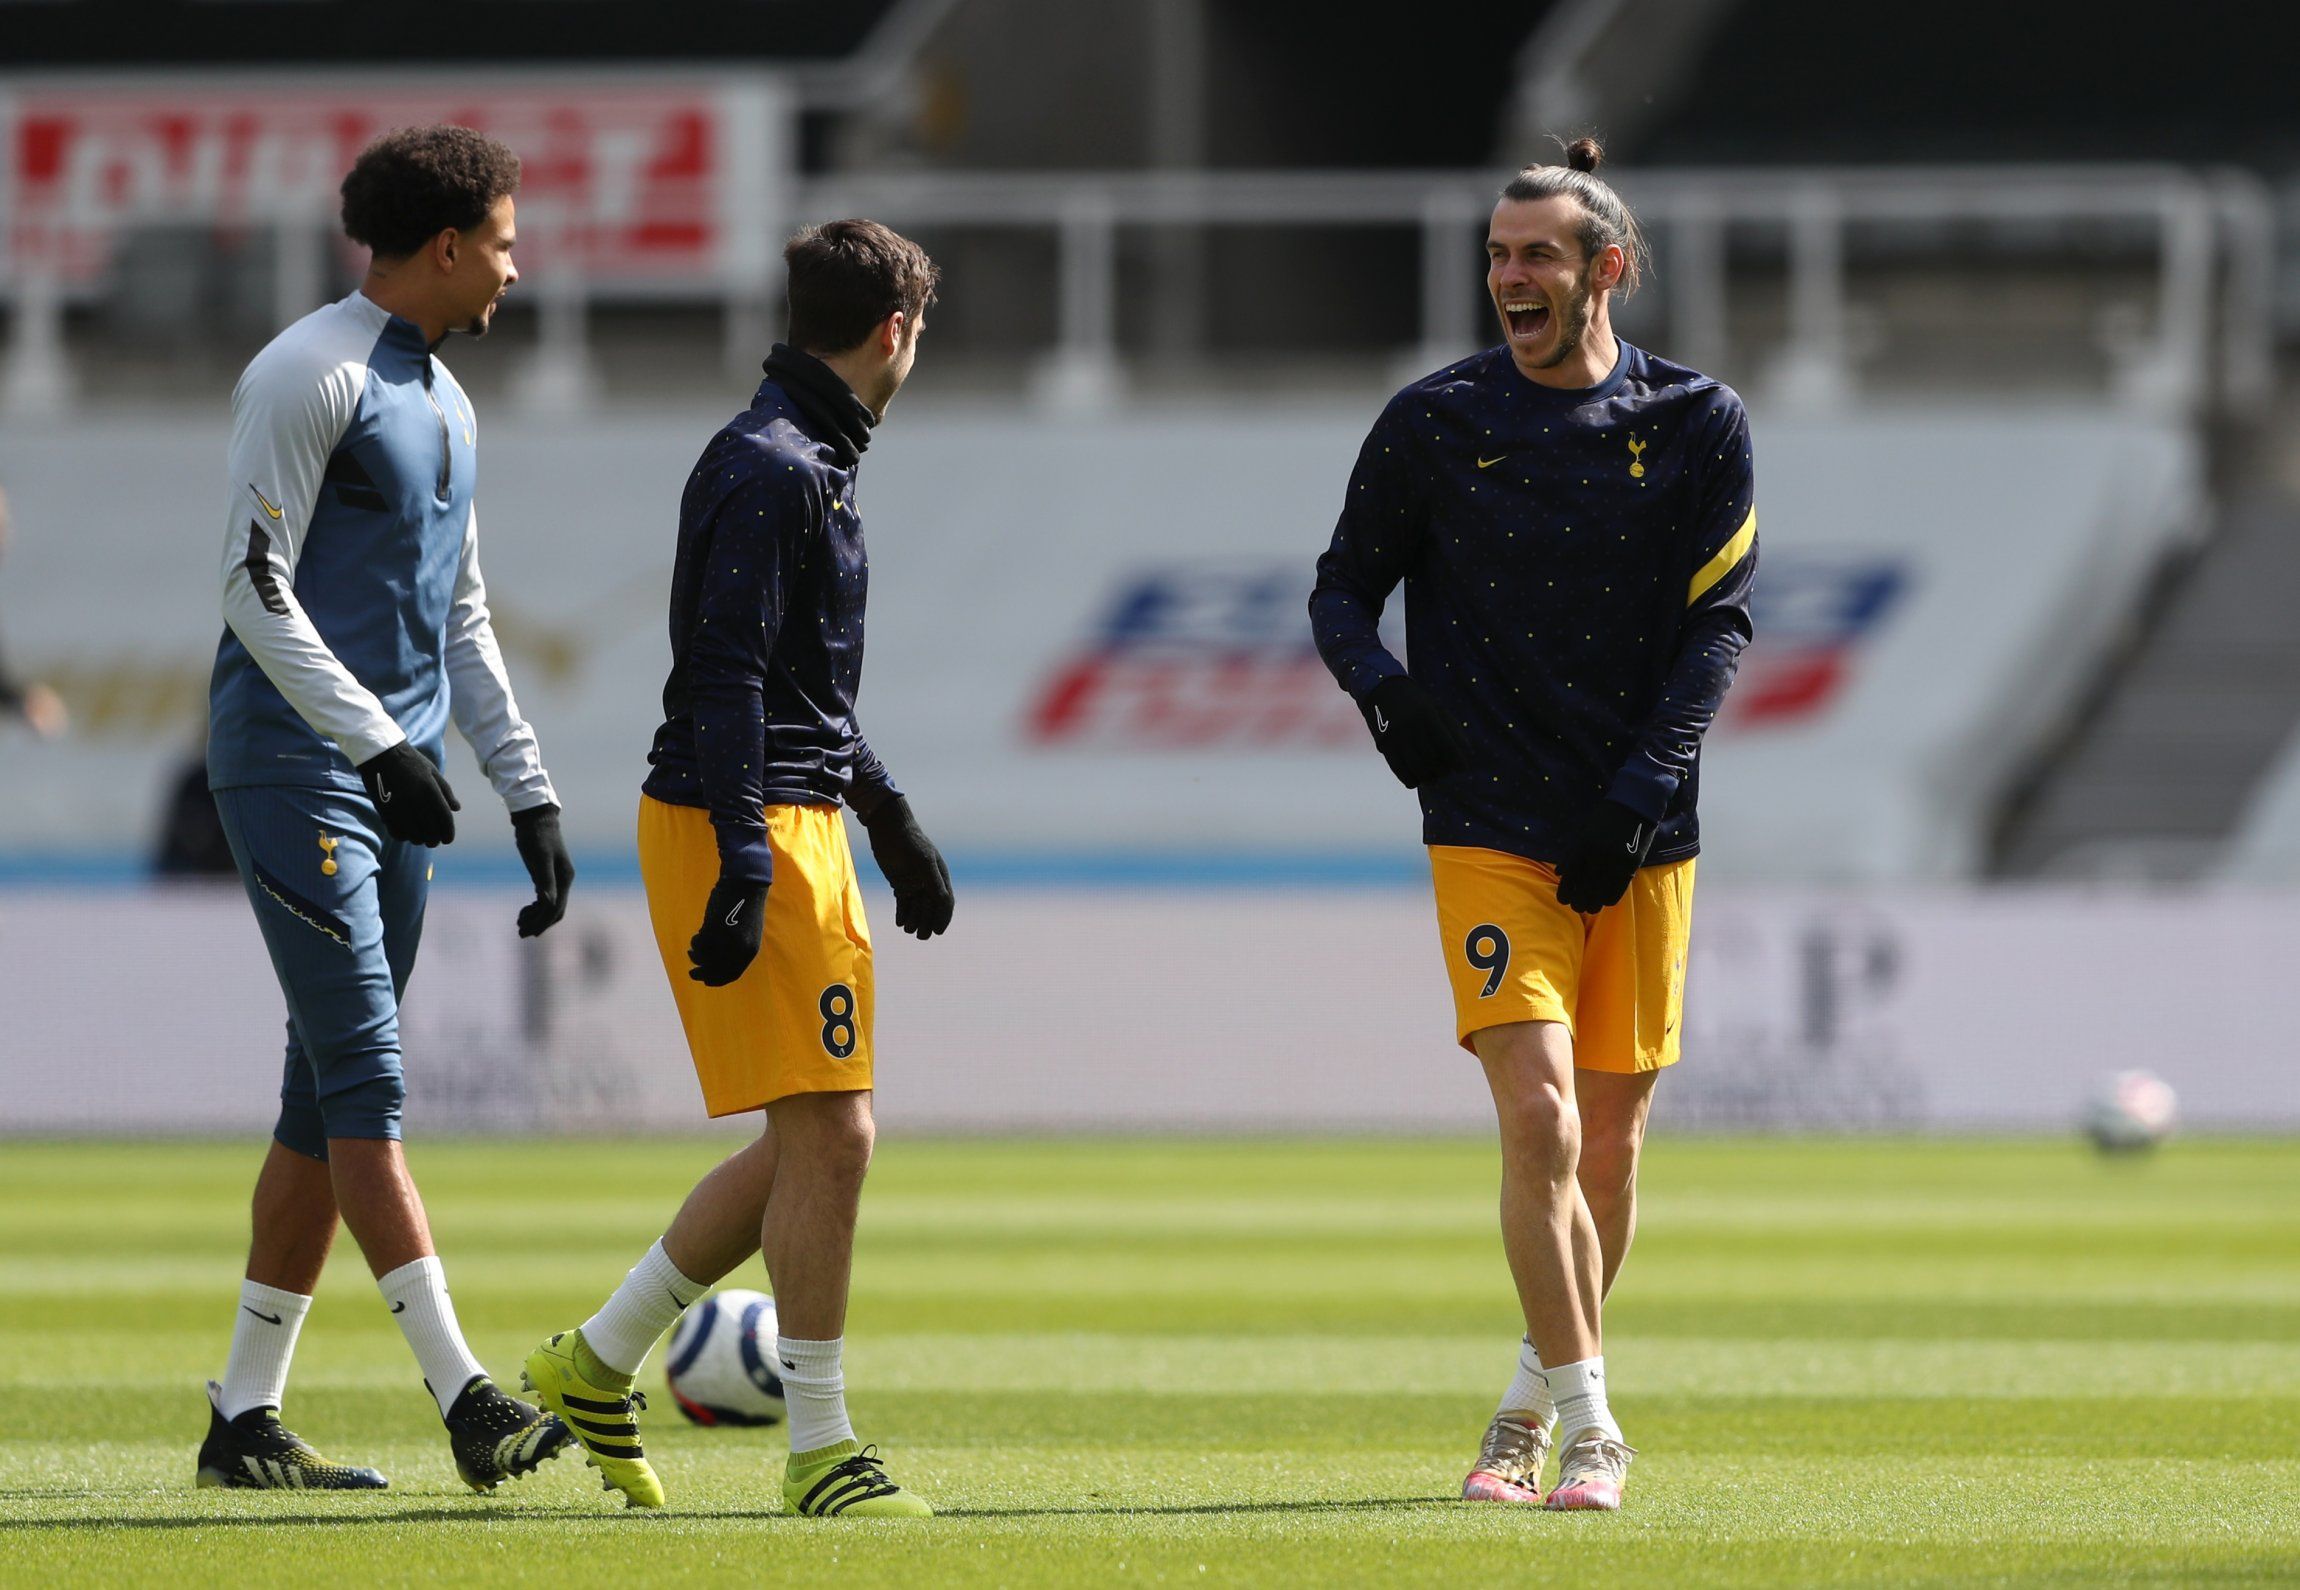 spurs winger gareth bale in warm up laughing with dele alli and harry winks pre-game newcastle premier league